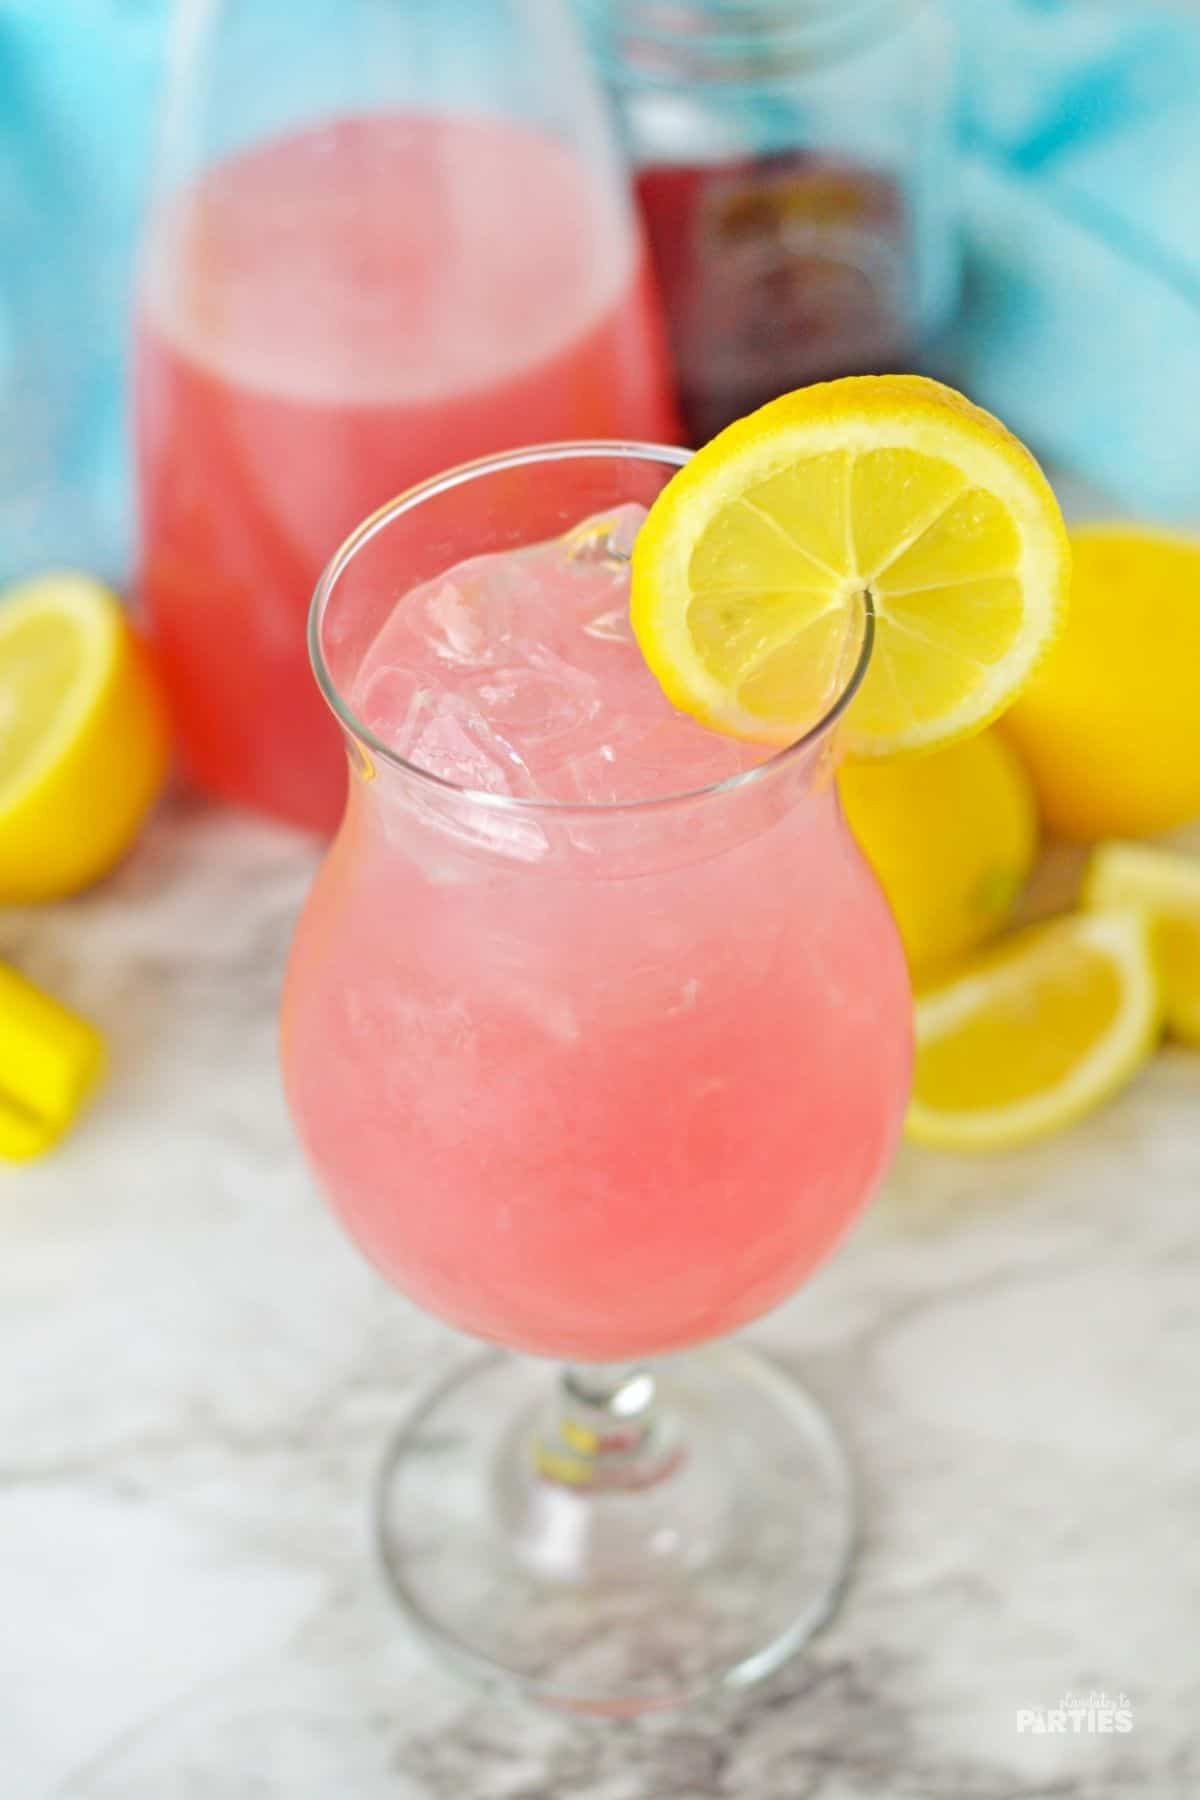 A hurricane glass filled with pink lemonade.